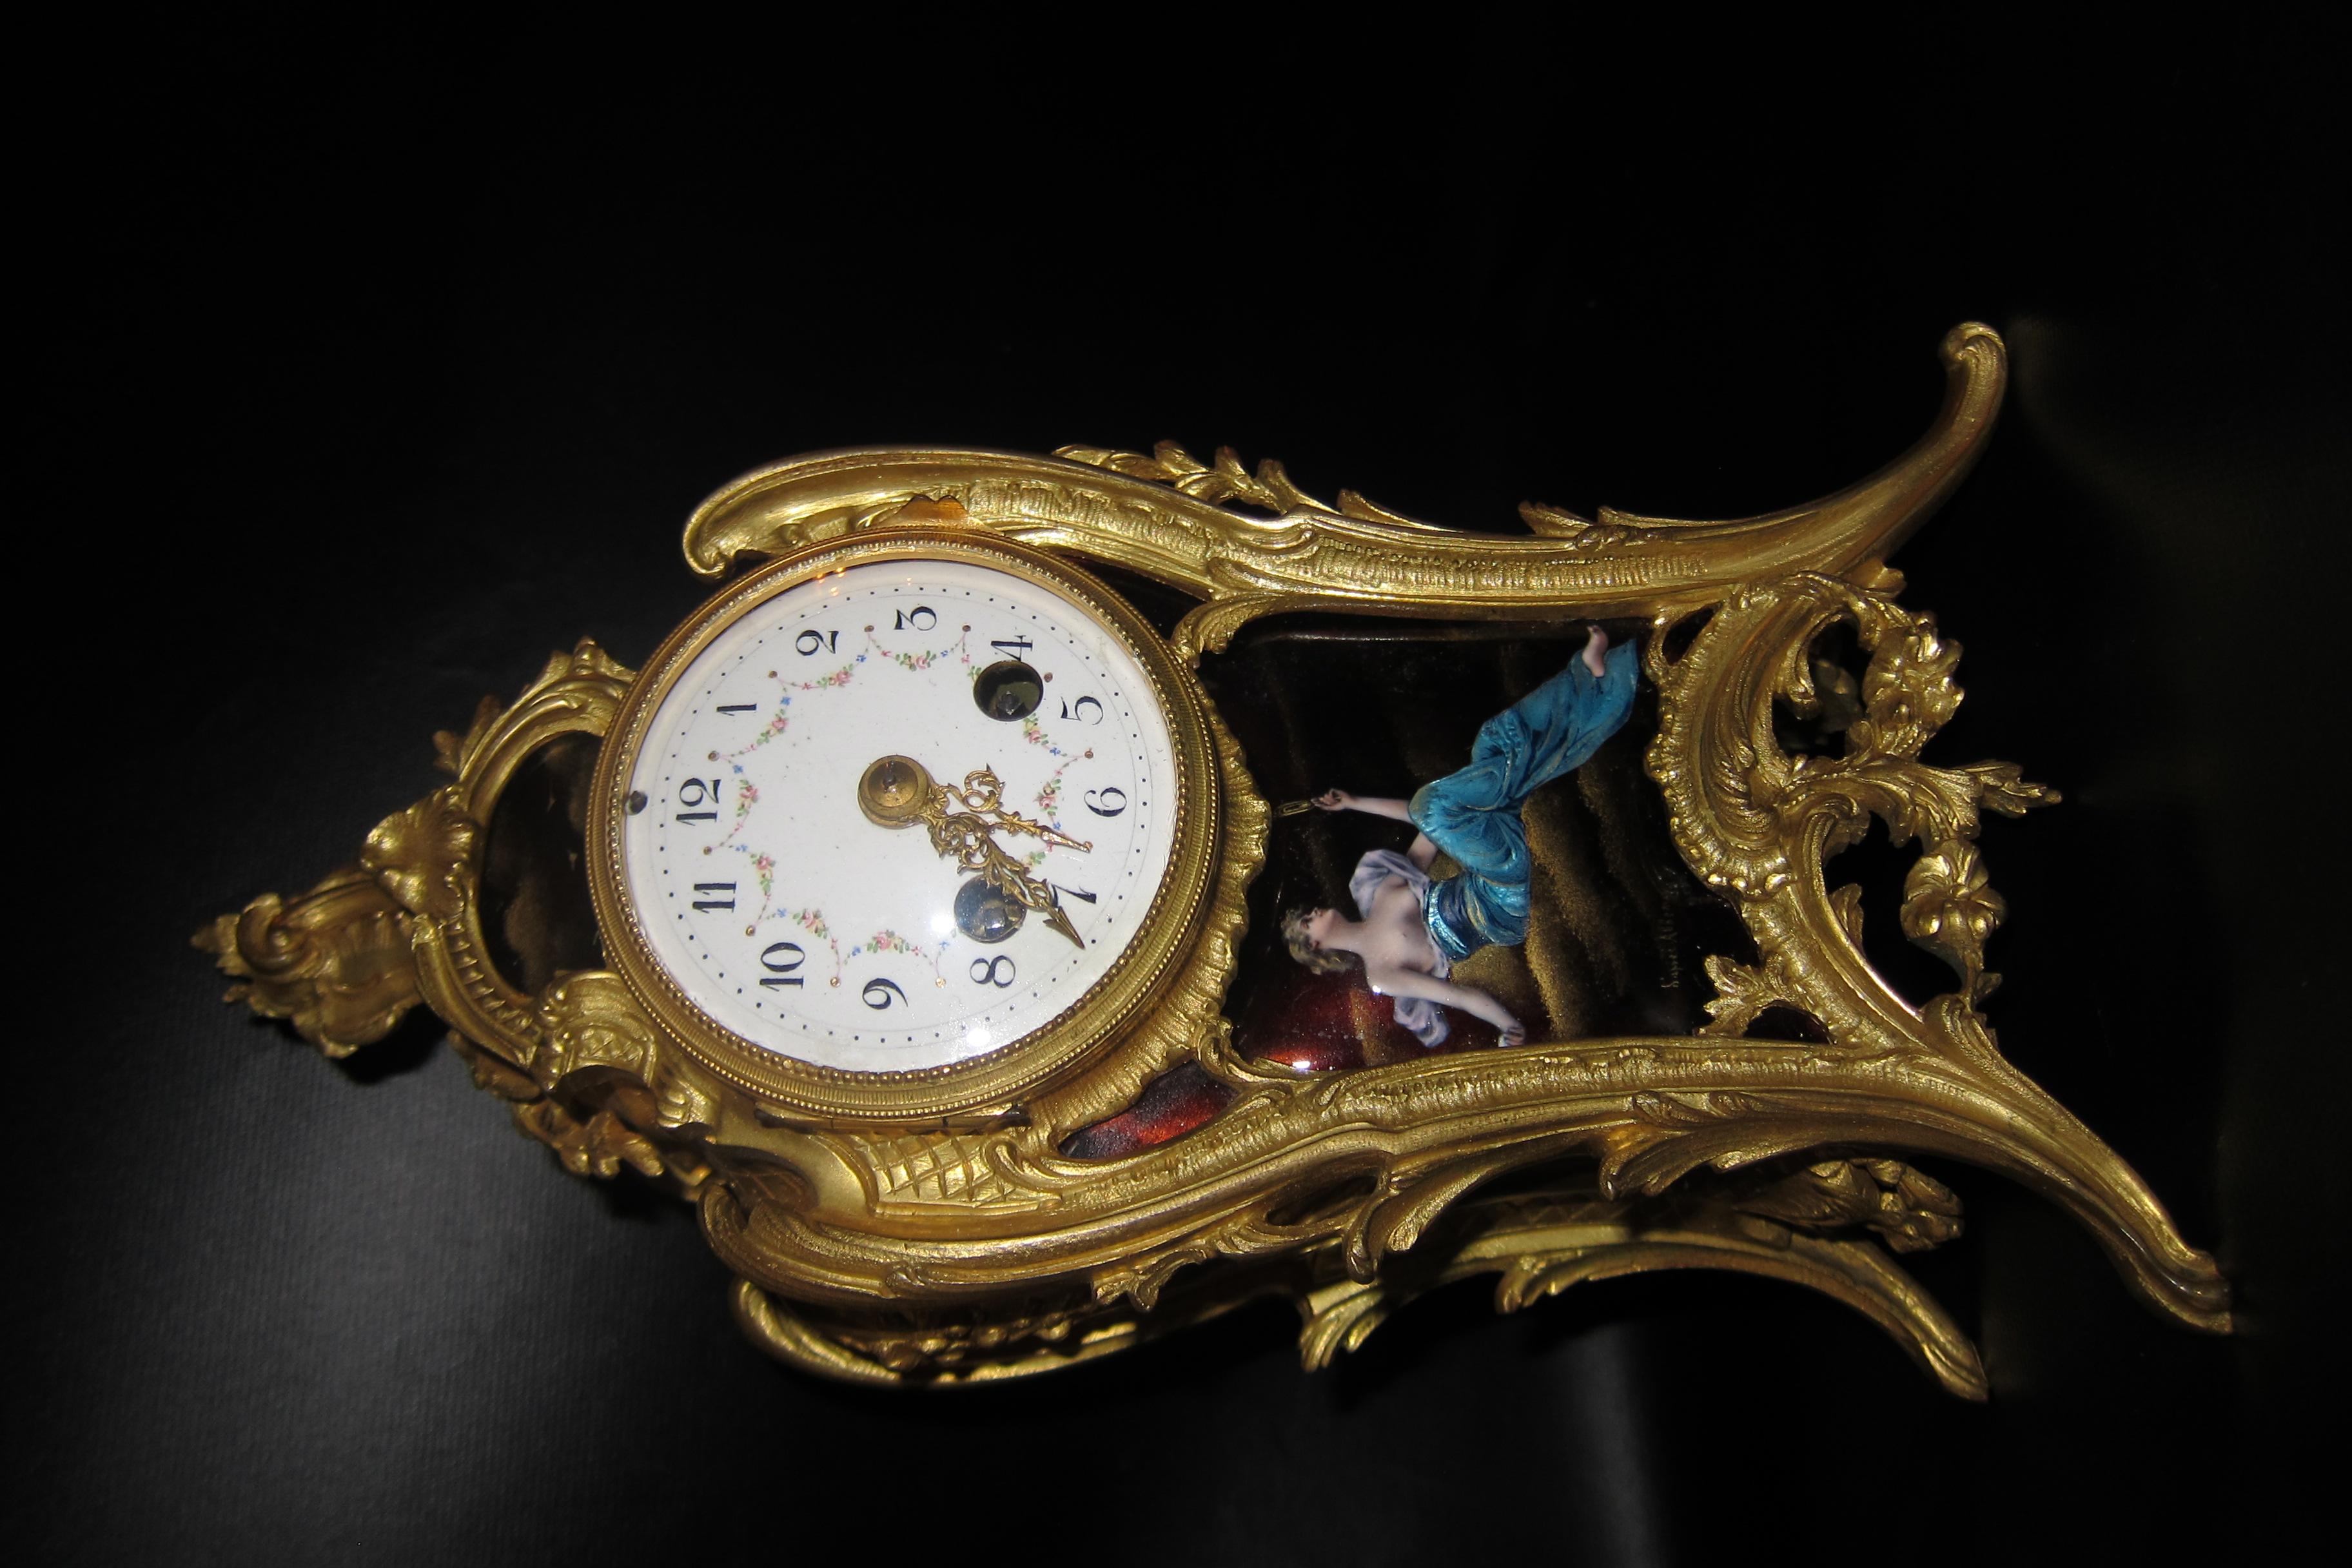 Vintage Mid-19th Century French Gilt Bronze and Enamel Boudoir Clock In Good Condition For Sale In Bronx, NY